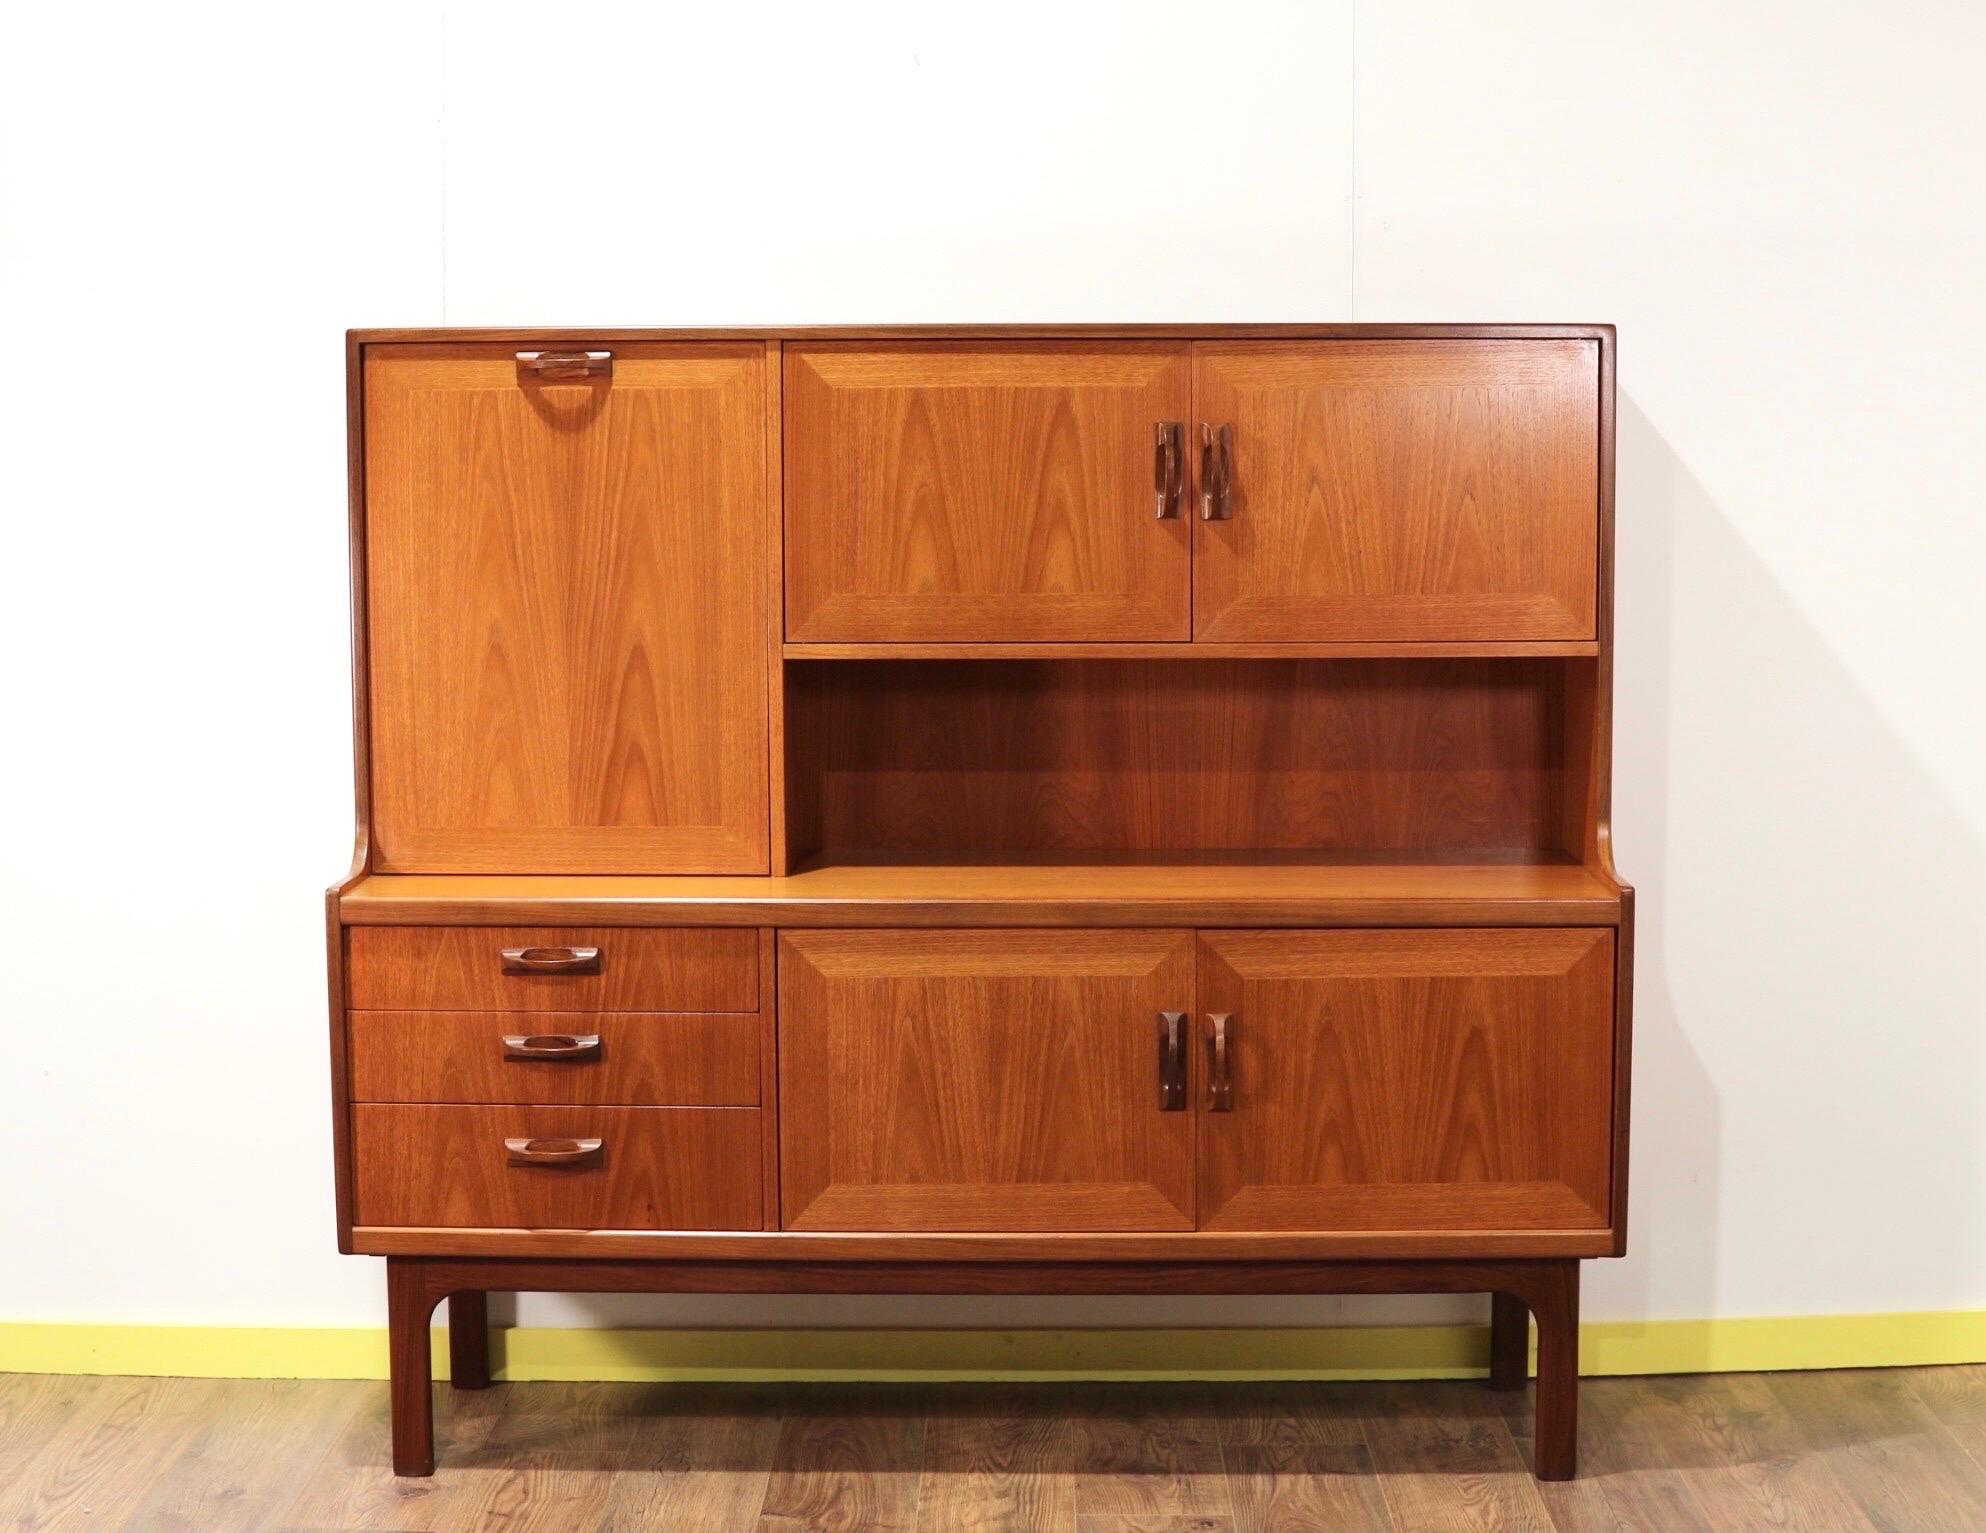 This delightful credenza was designed and produced by British furniture manufacturing company G-Plan in the 1960's
G Plan - E. Gomme Ltd was based in High Wycombe, England, a major center of British furniture manufacturing. The company was revered